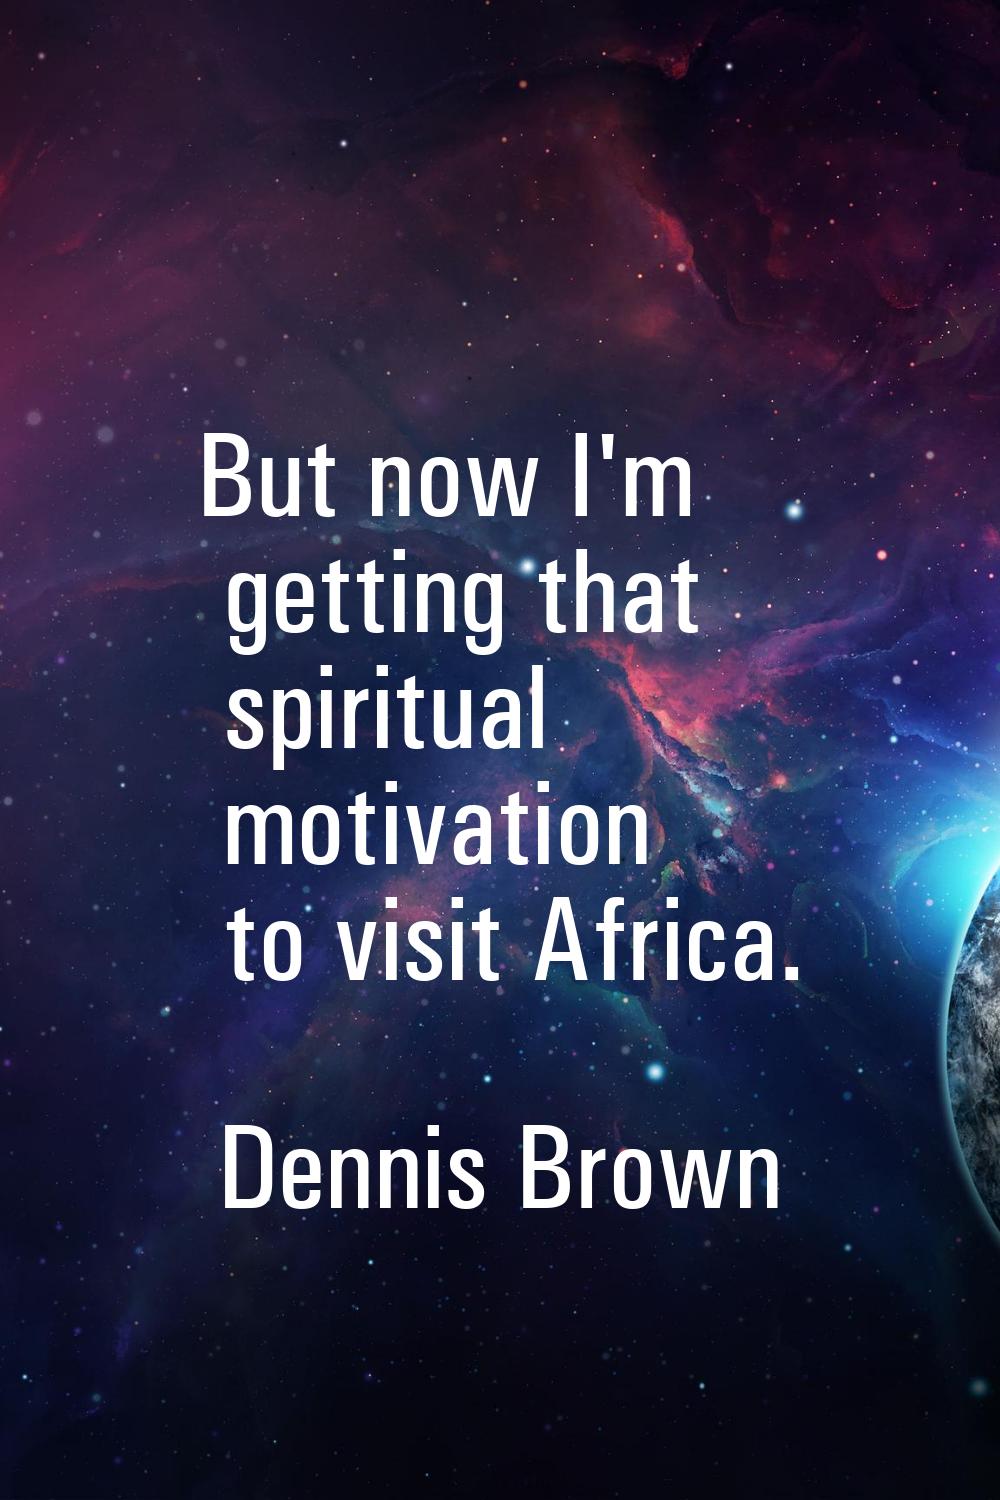 But now I'm getting that spiritual motivation to visit Africa.